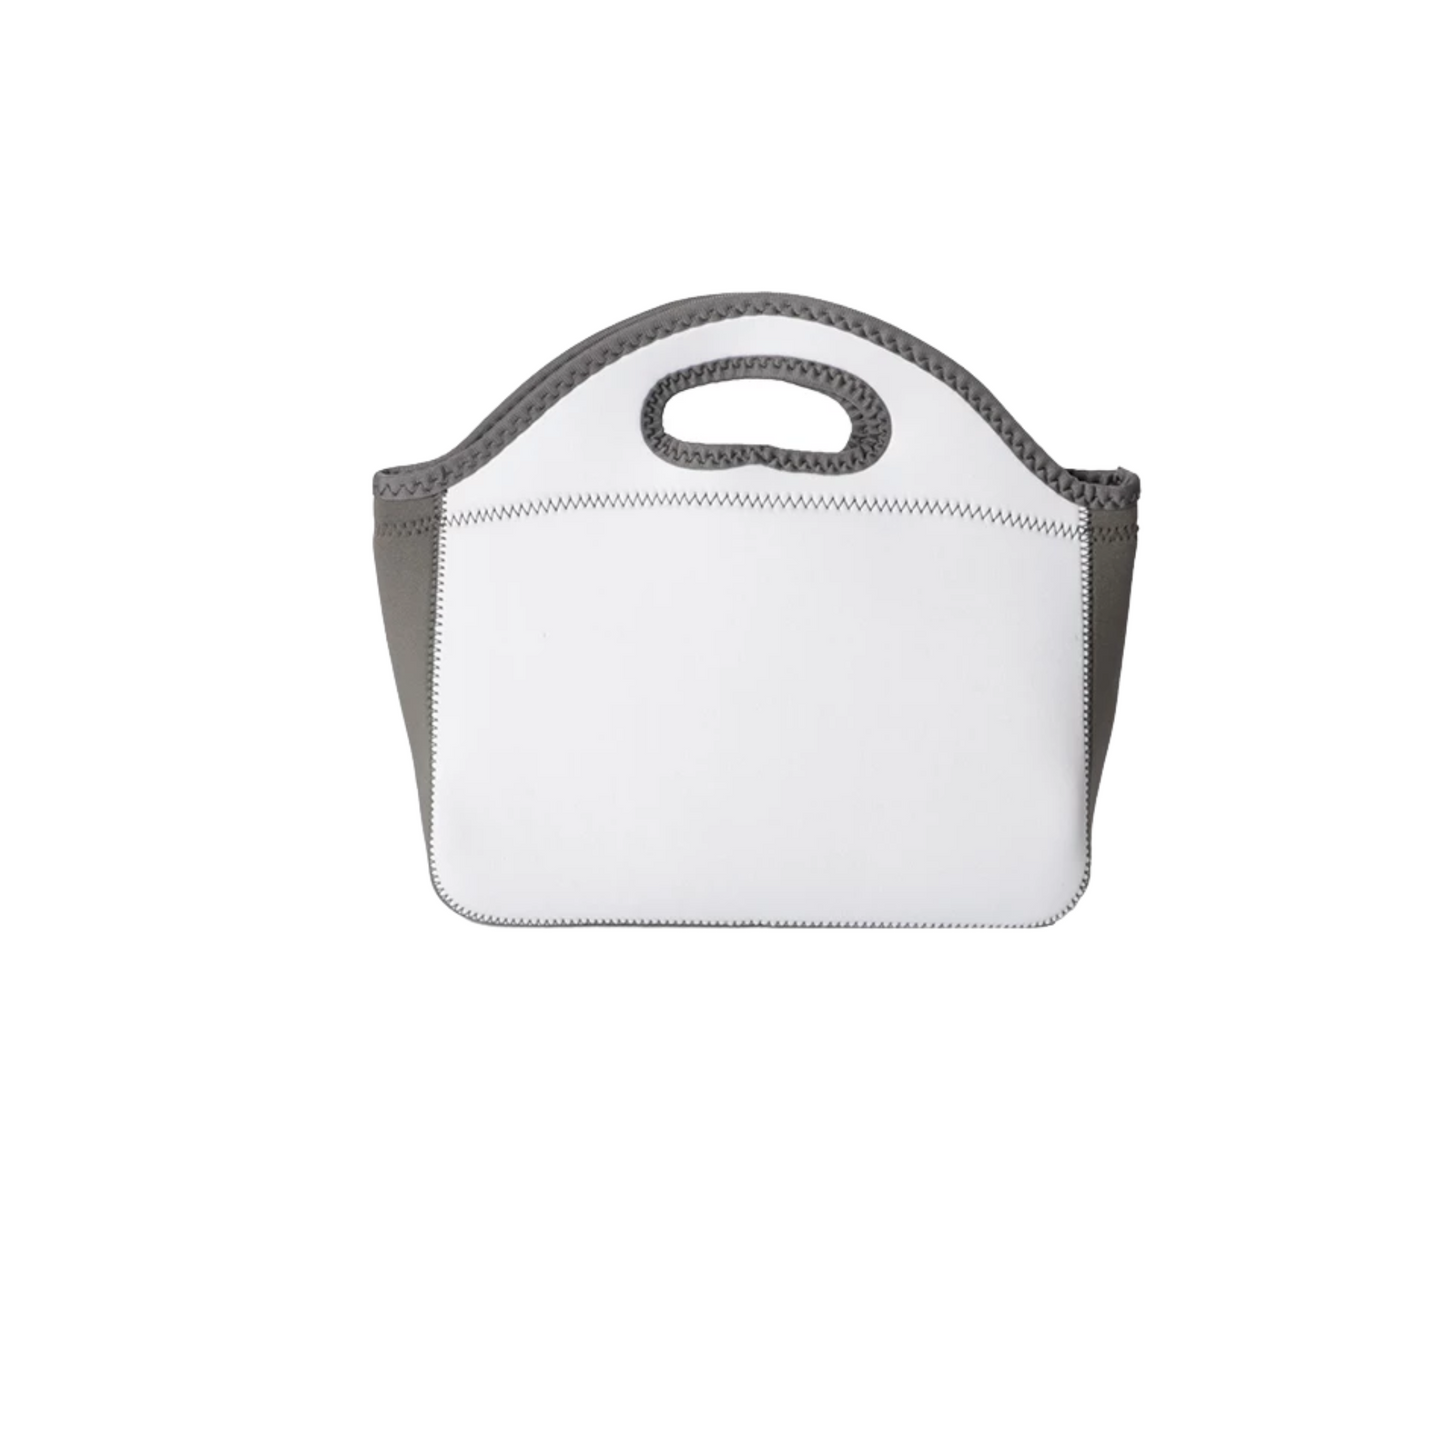 Neoprene Sublimation Lunch Tote RECTANGLE Style